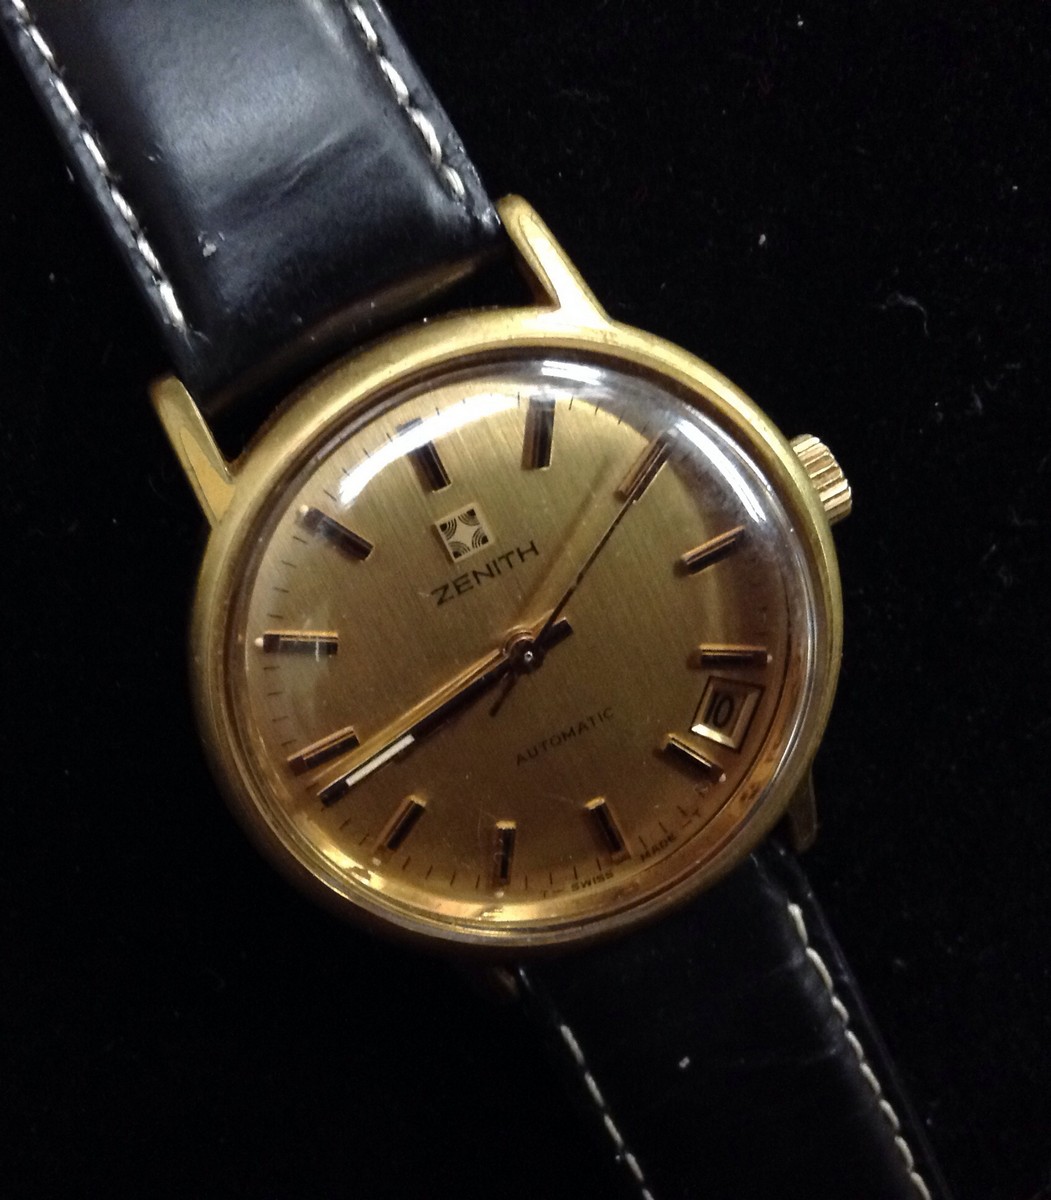 A Zenith gold caped and stainless steel case gentleman's wristwatch, gold coloured dial, quartered,